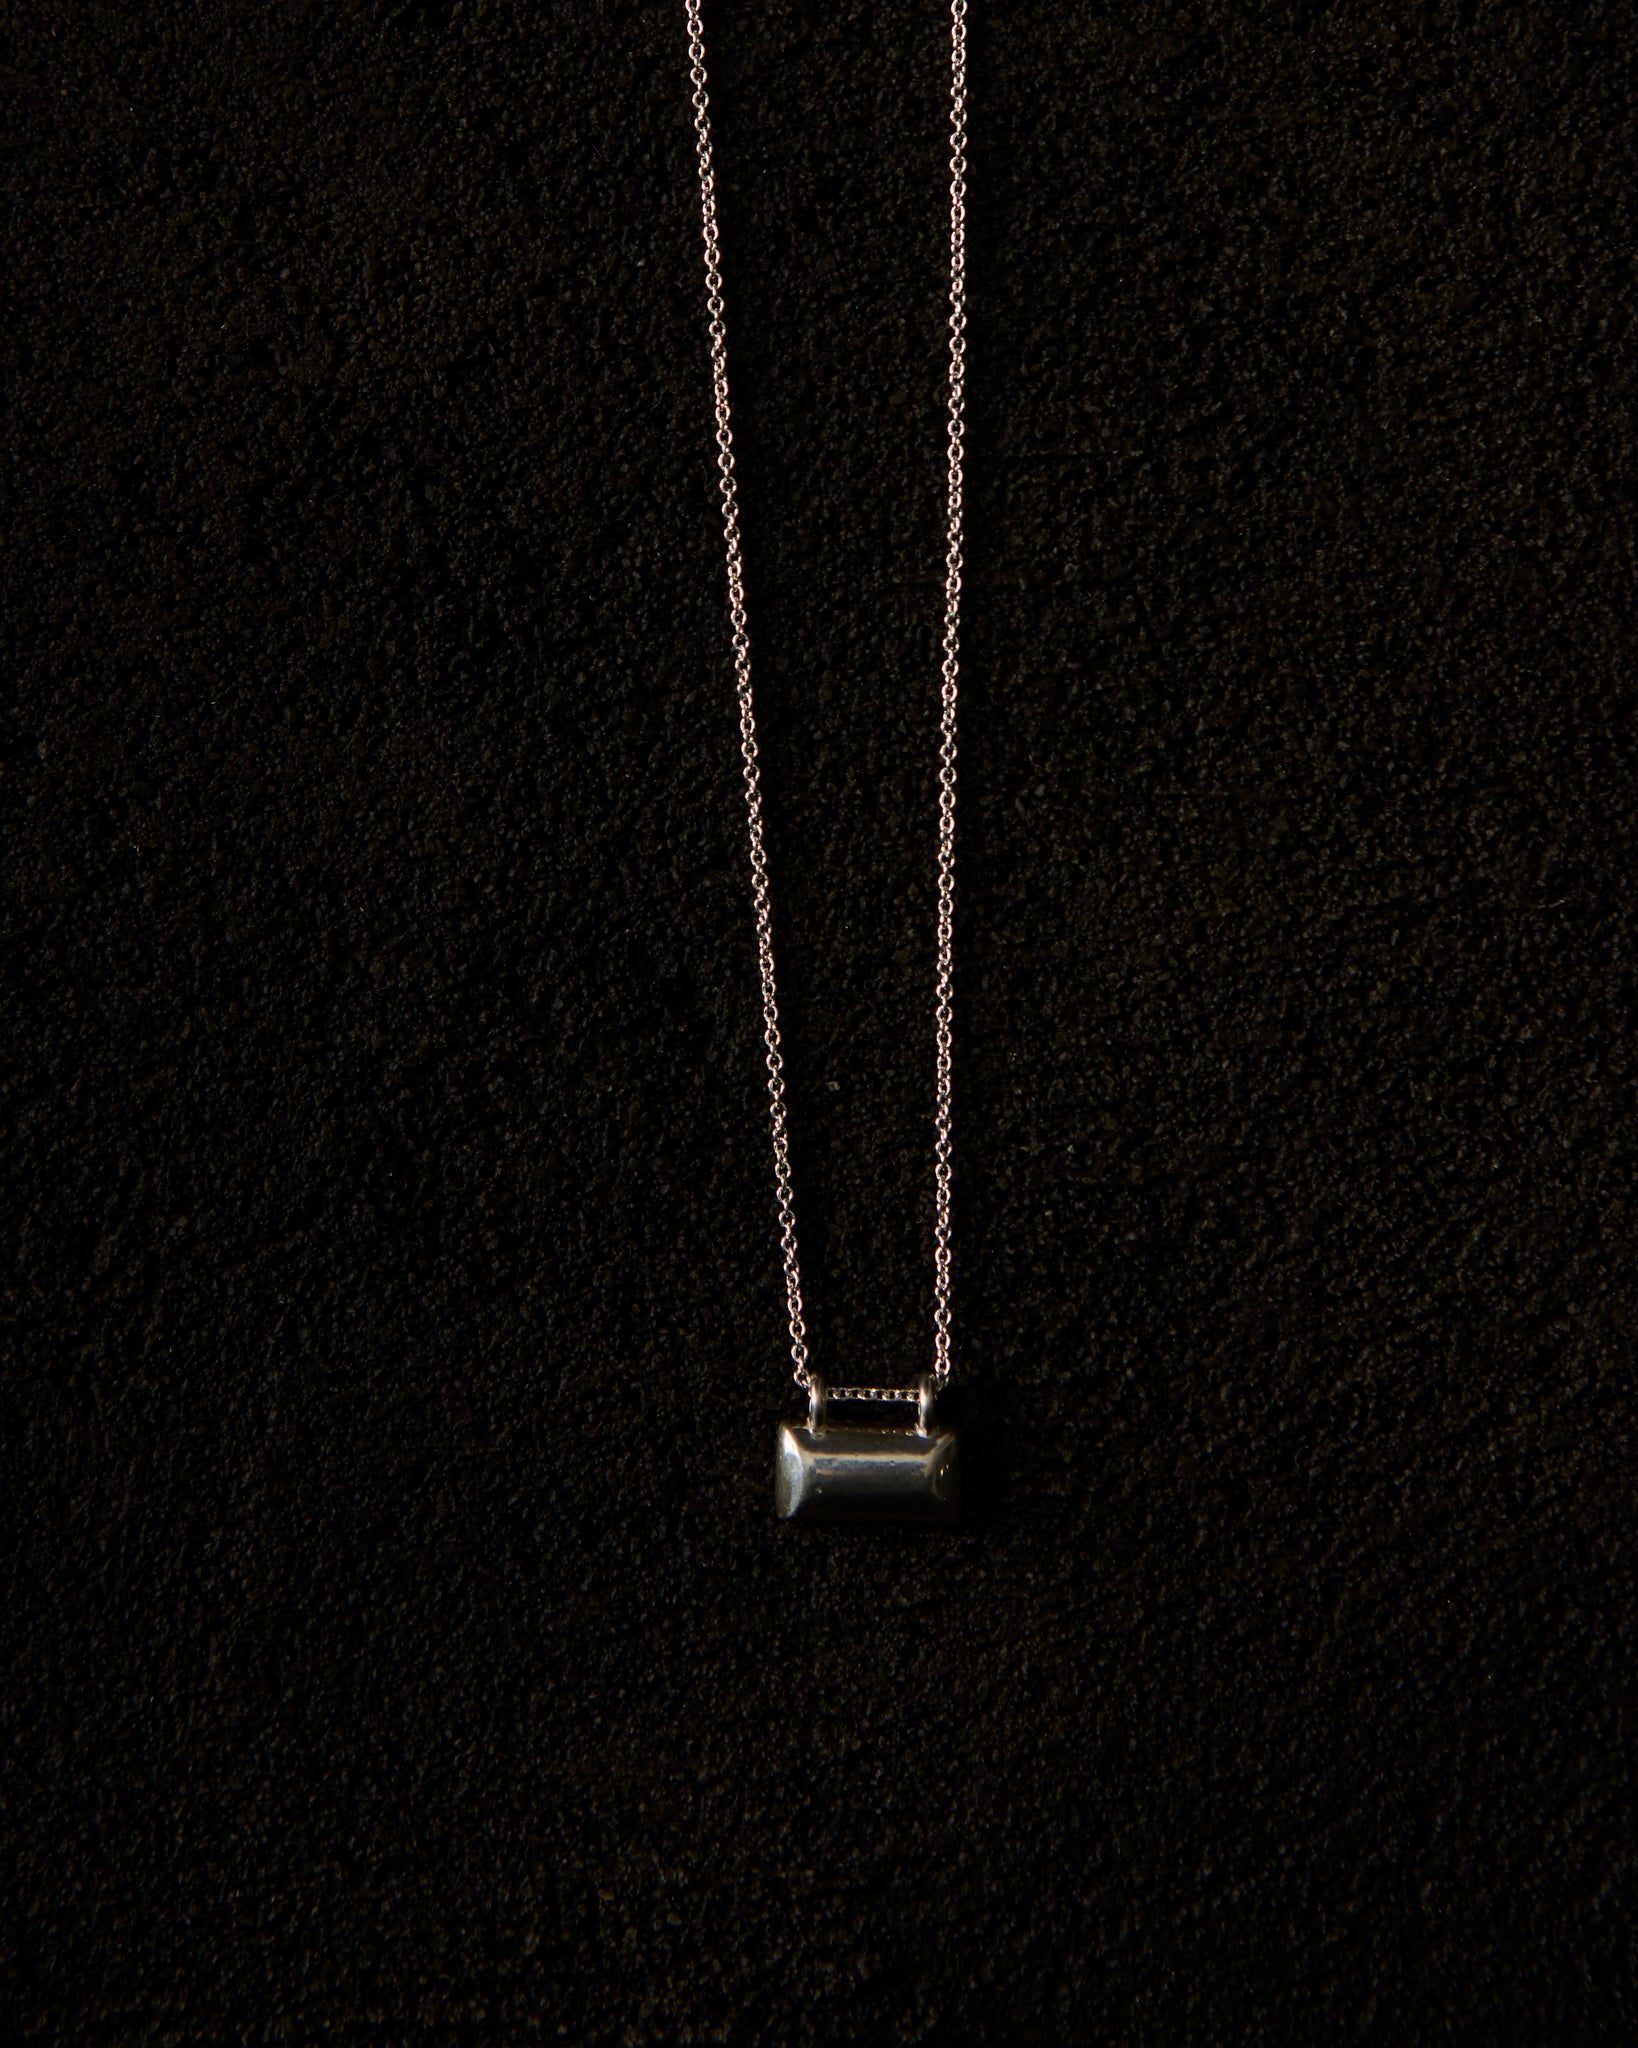 Another Feather Small Brick Necklace, Silver